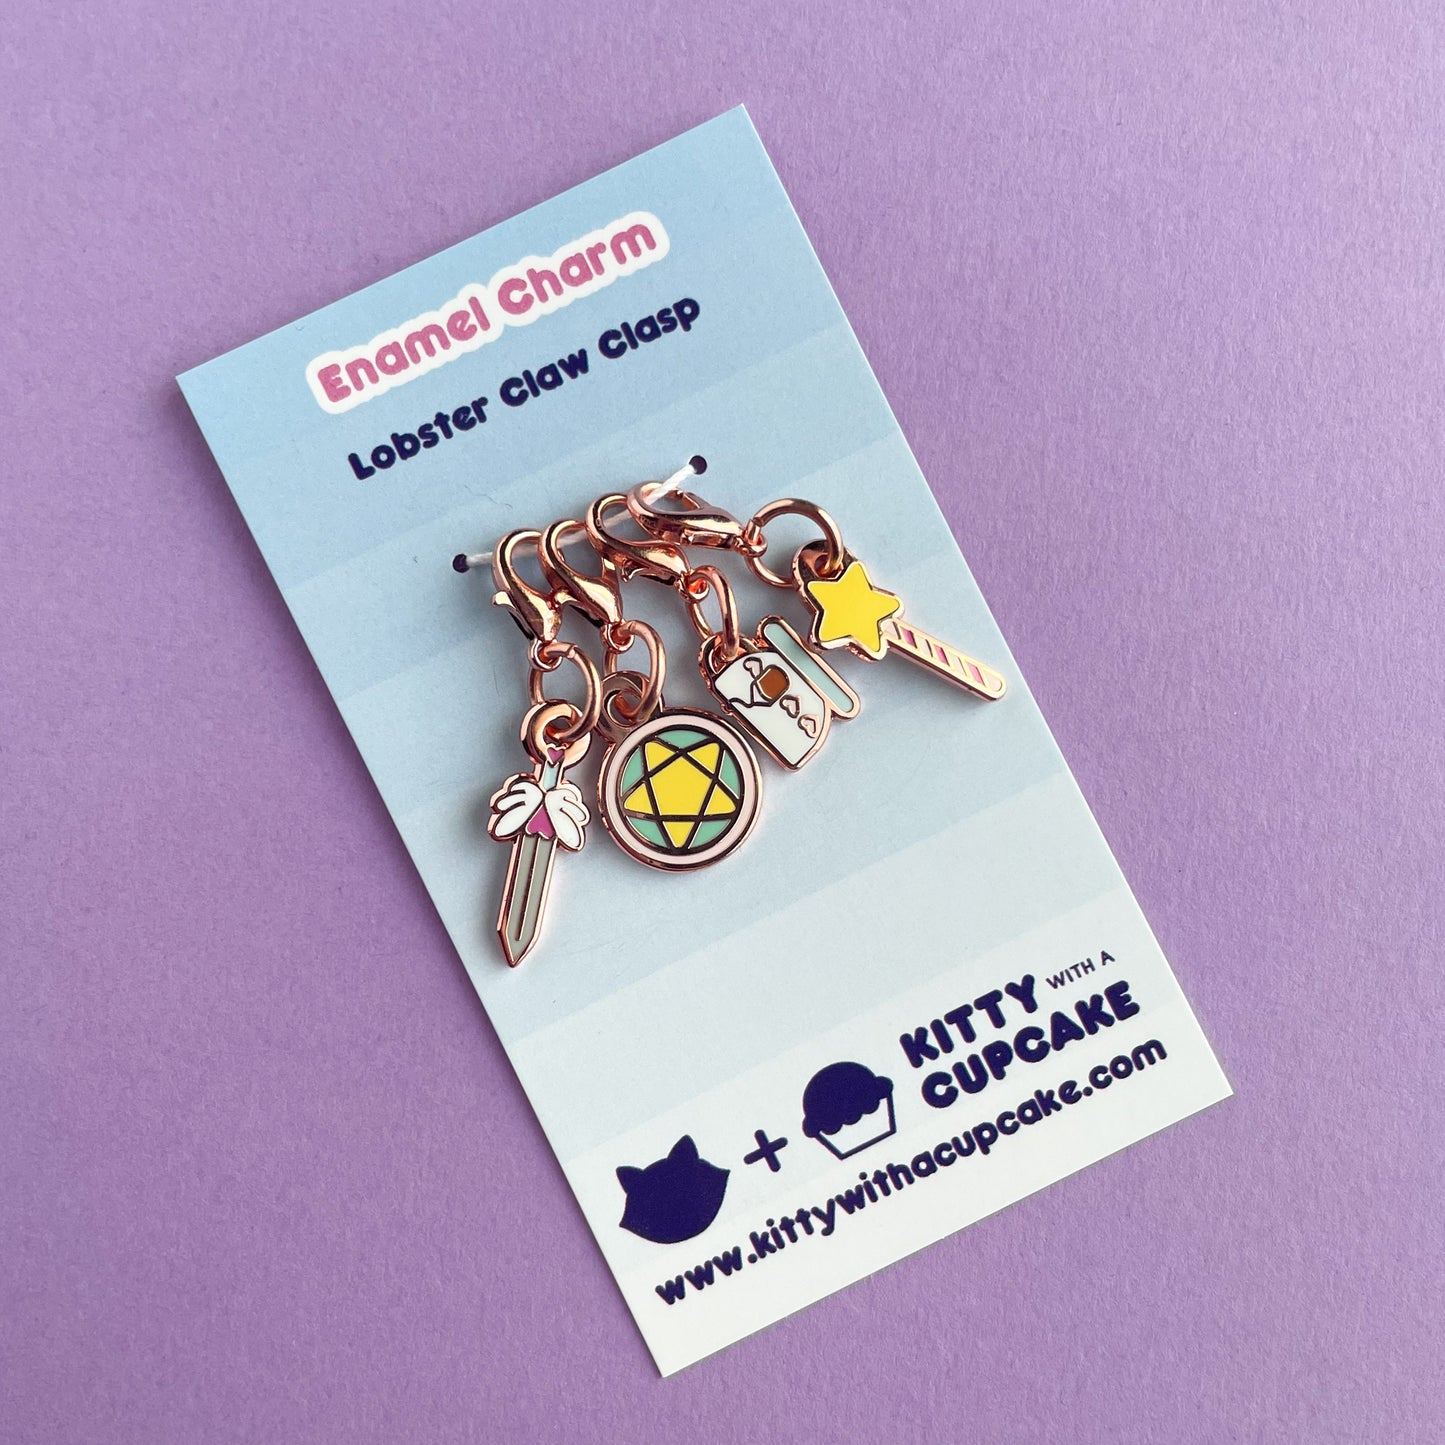 A collection of charms on a card on a lavender background. The charms are shaped like a sword, a teacup, a wand, and a pentacle circle.